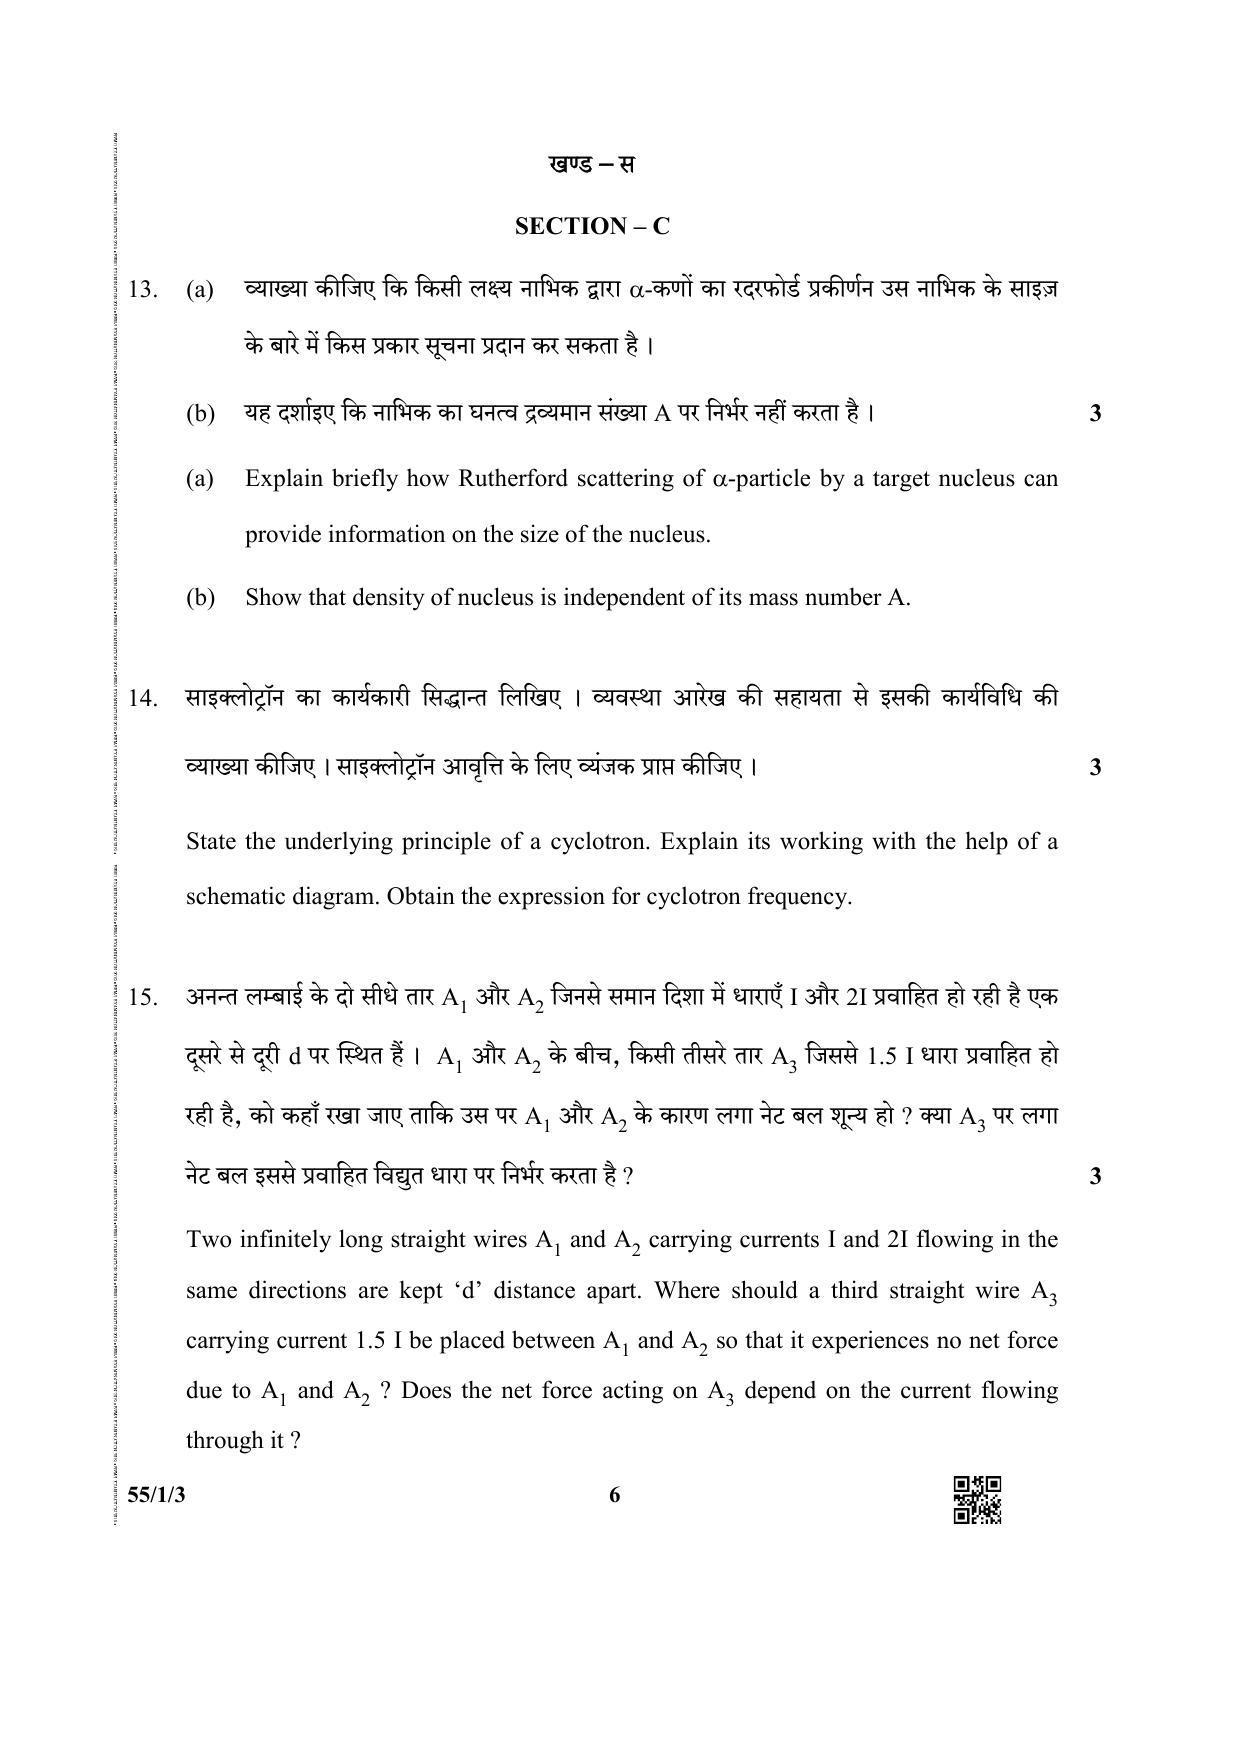 CBSE Class 12 55-1-3 (Physics) 2019 Question Paper - Page 6